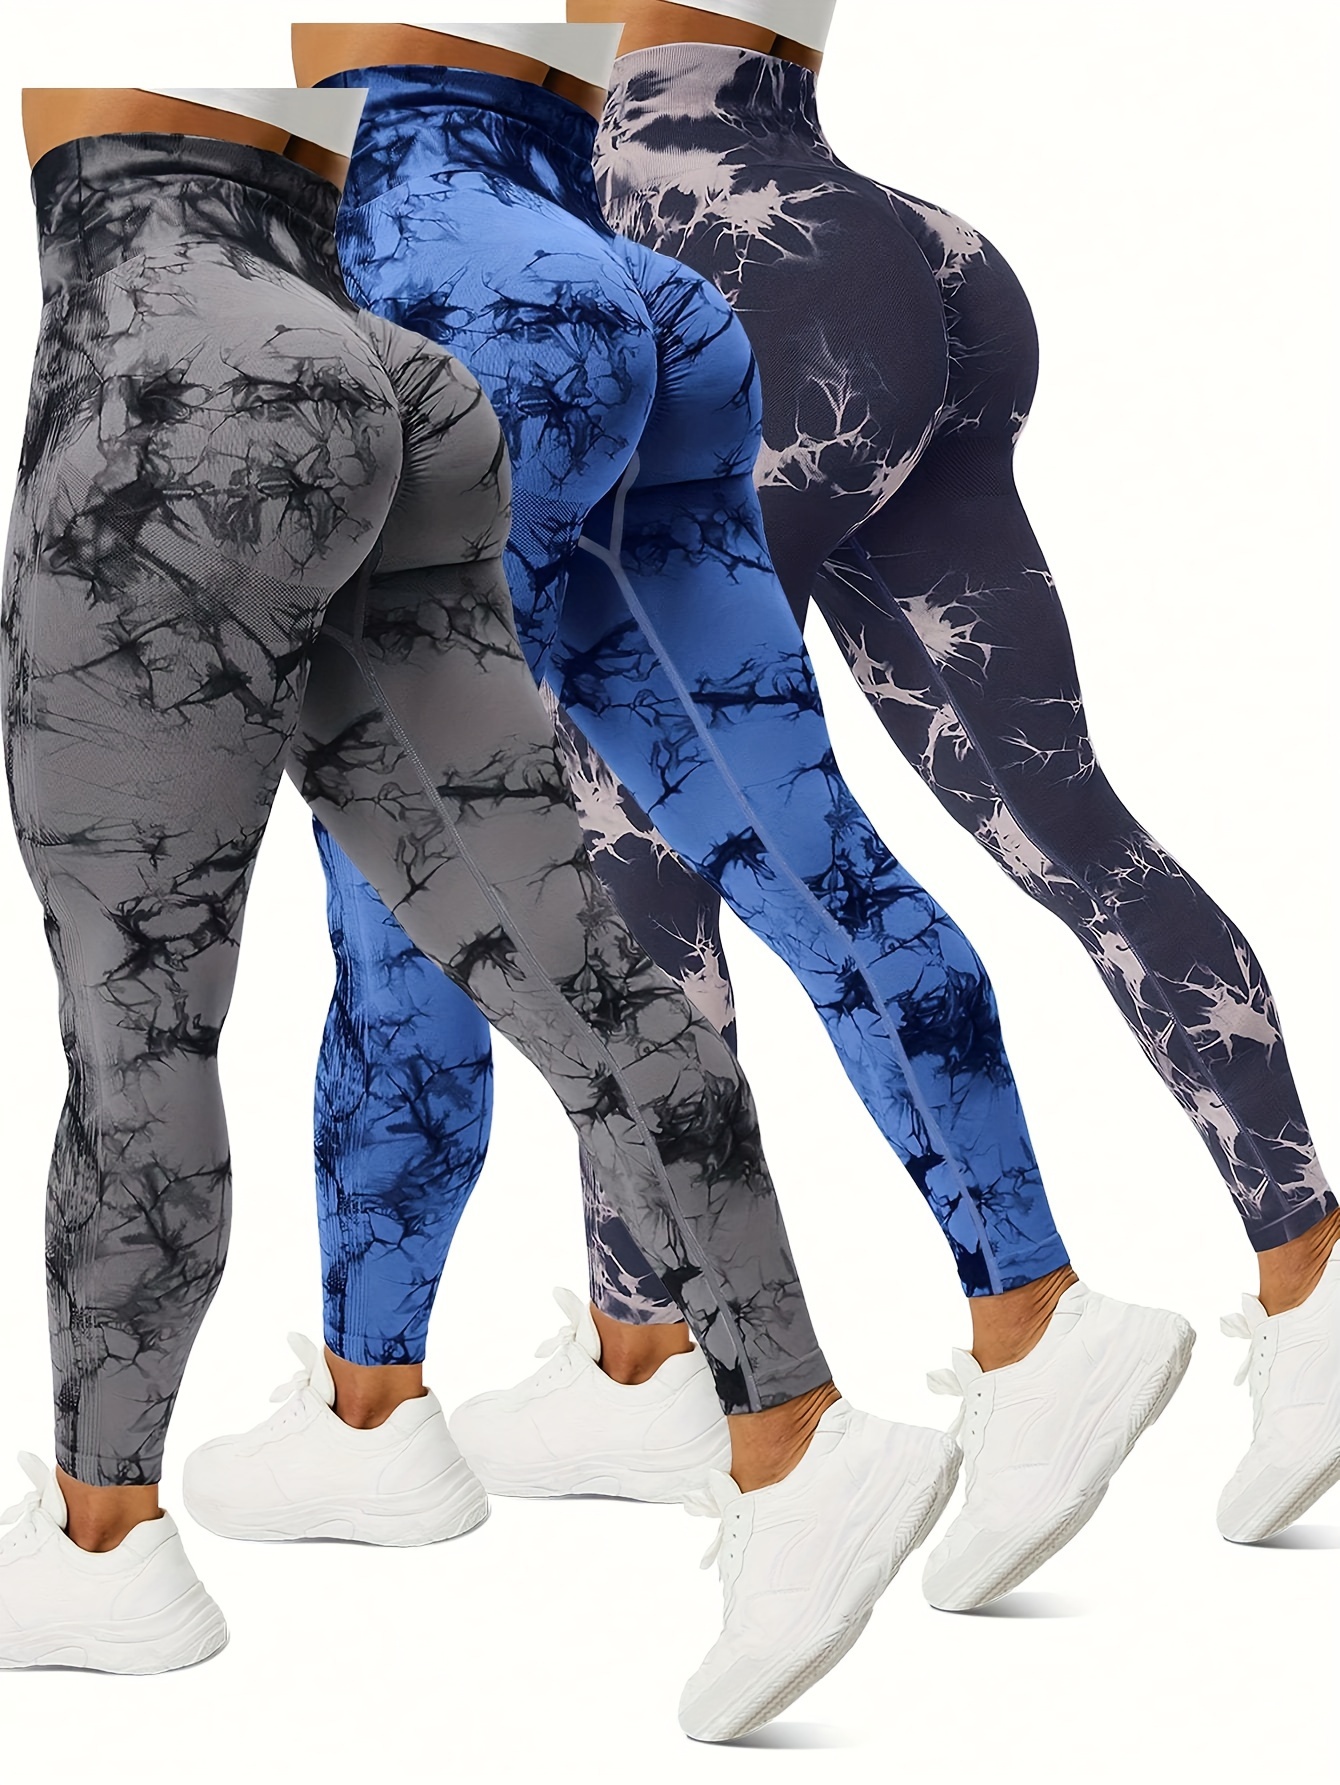 Tie Dye High Stretch Yoga Workout Pants, Fitness Running Sports Leggings,  Women's Activewear